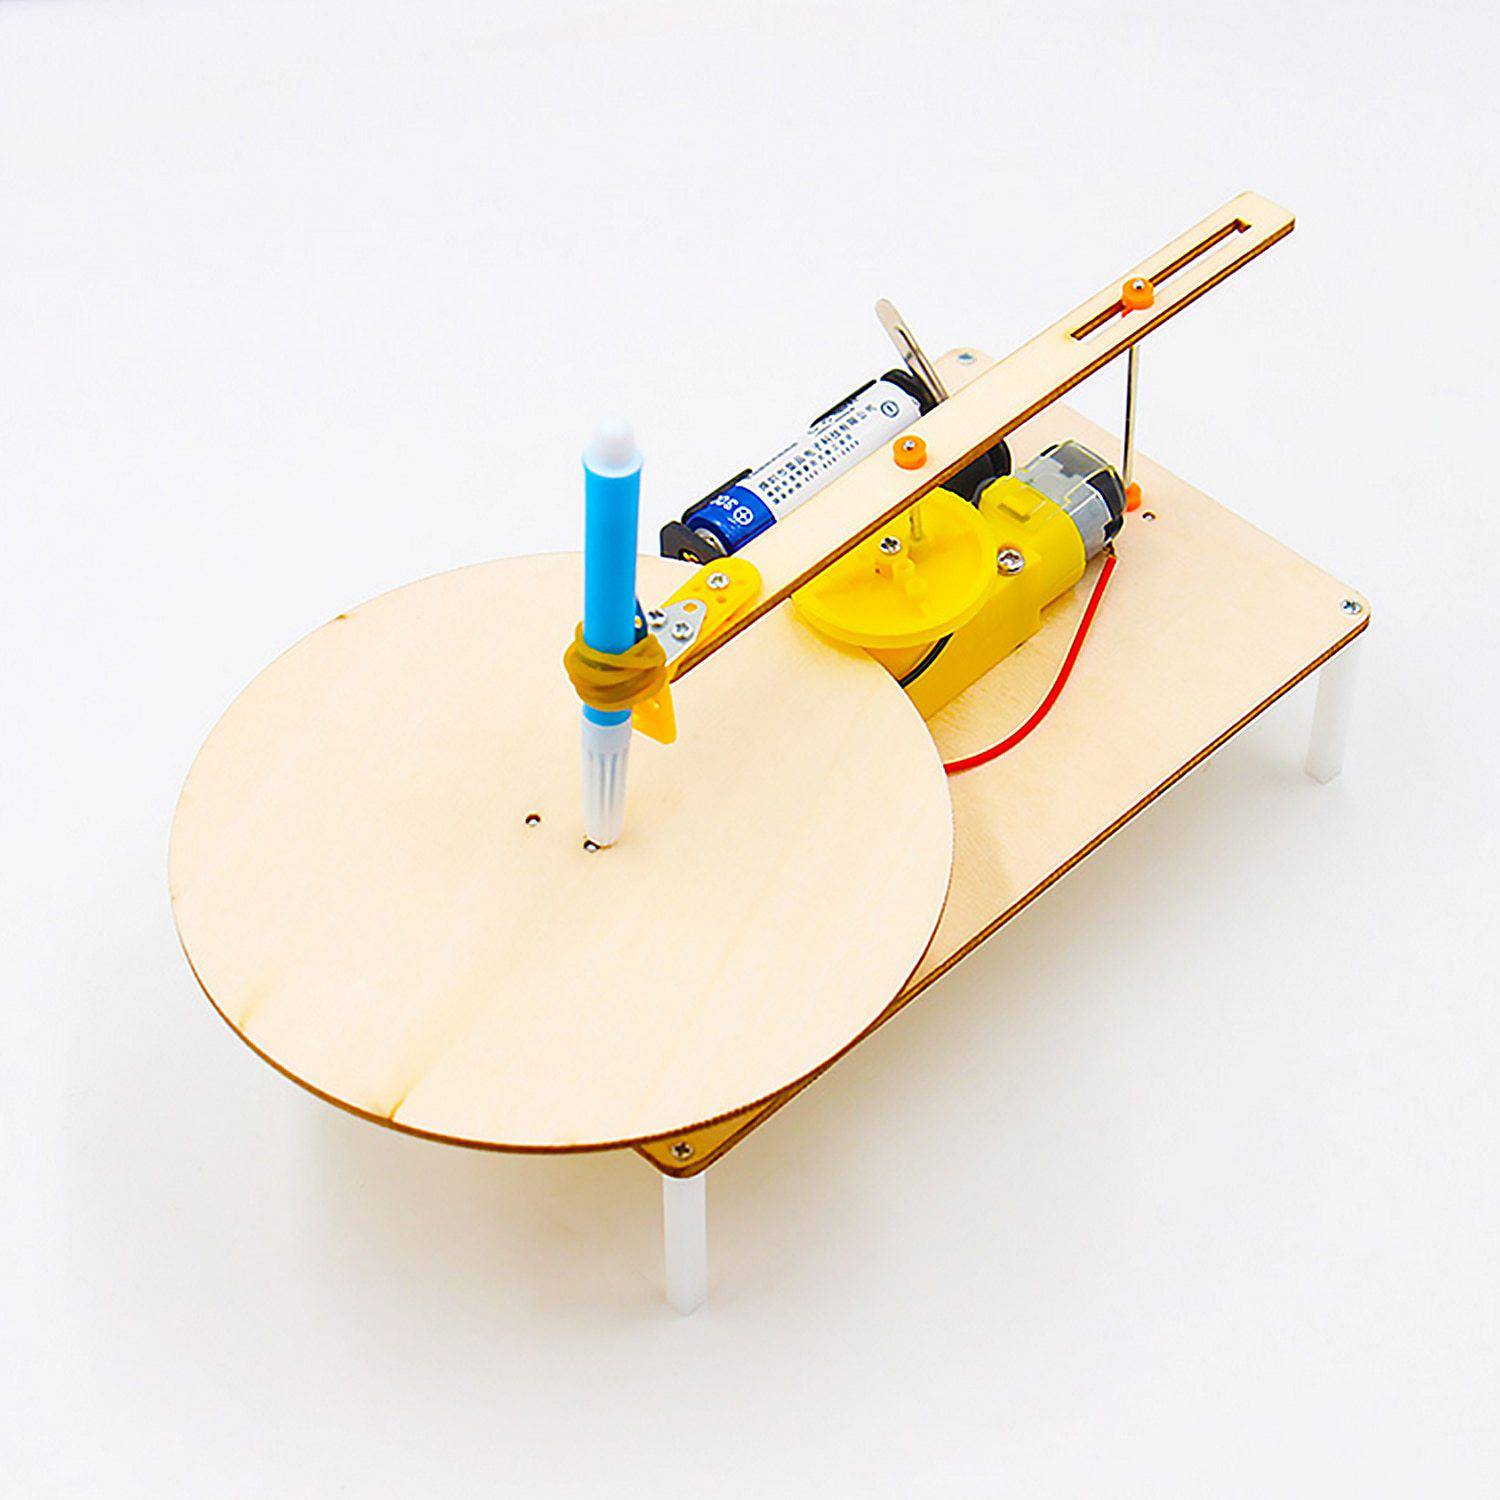 https://woodenpuzzletoys.com/cdn/shop/products/kids-7-10-kids-creative-diy-assembled-wooden-electric-plotter-kit-model-automatic-painting-drawing-robot-science-physics-experiment-toy-28551258636370_2000x.jpg?v=1638363723